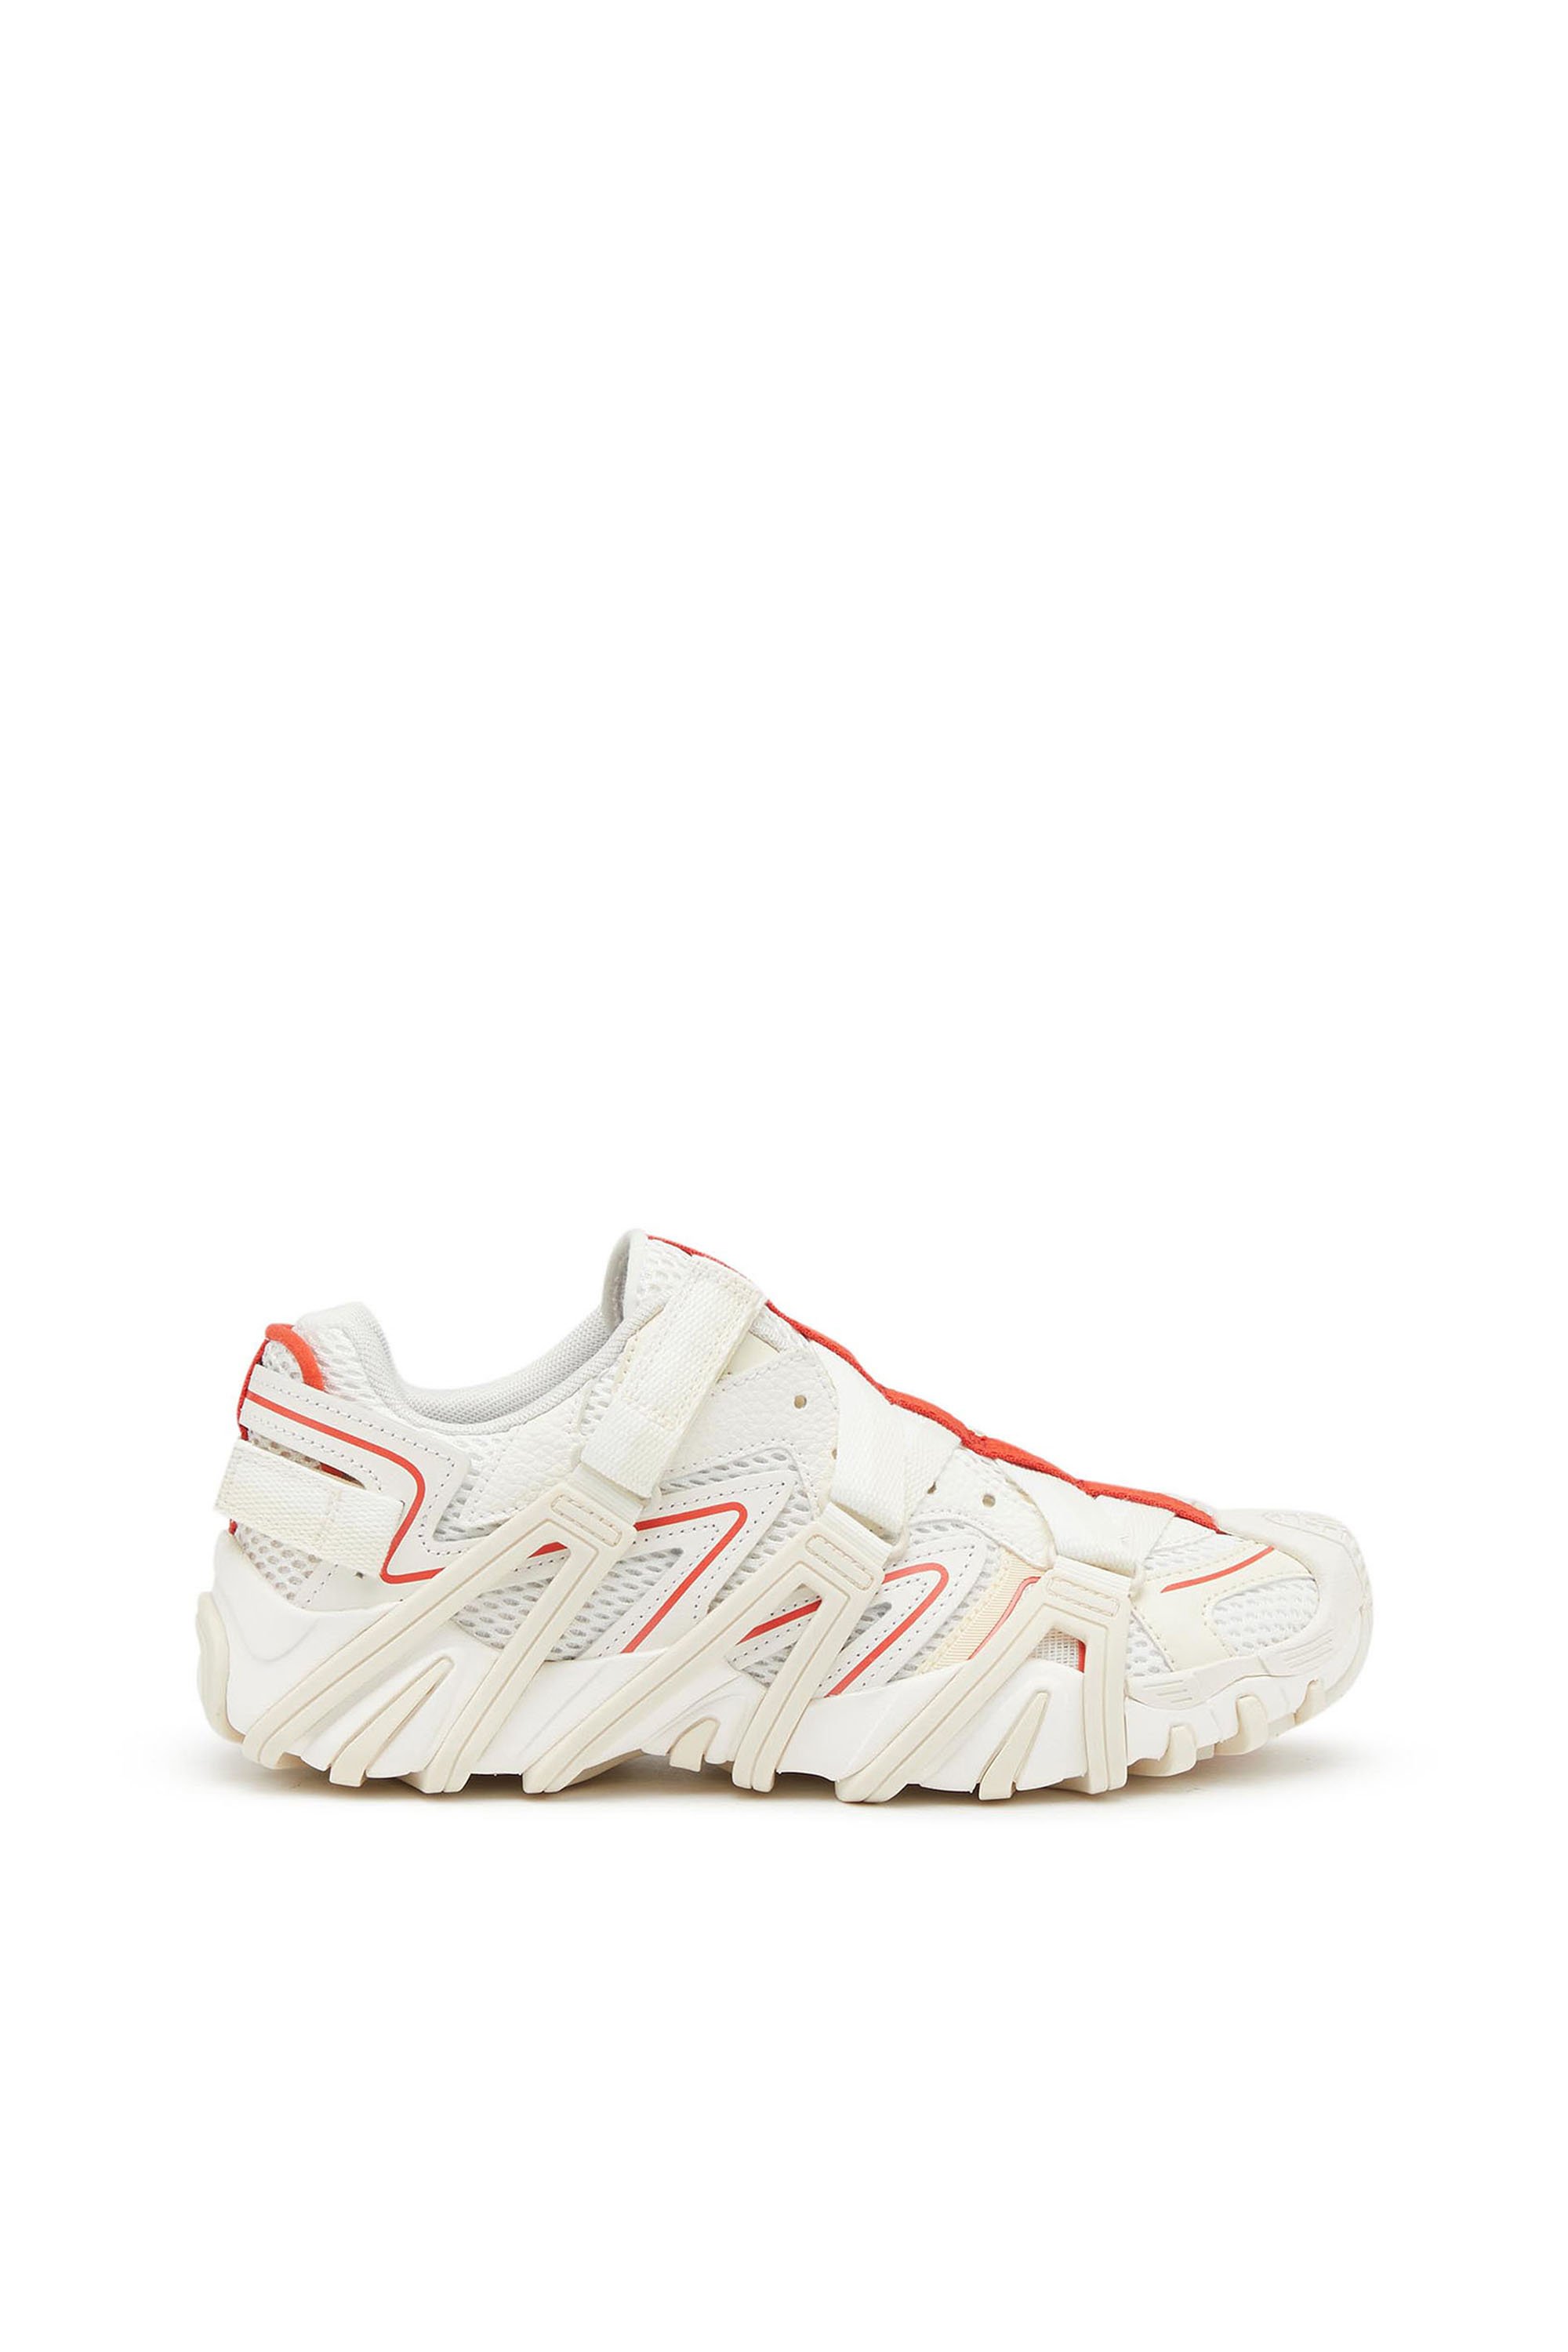 Diesel - S-PROTOTYPE-CR  W, Woman S-Prototype-CR  W - Cage sneakers in mesh and leather in Multicolor - Image 1